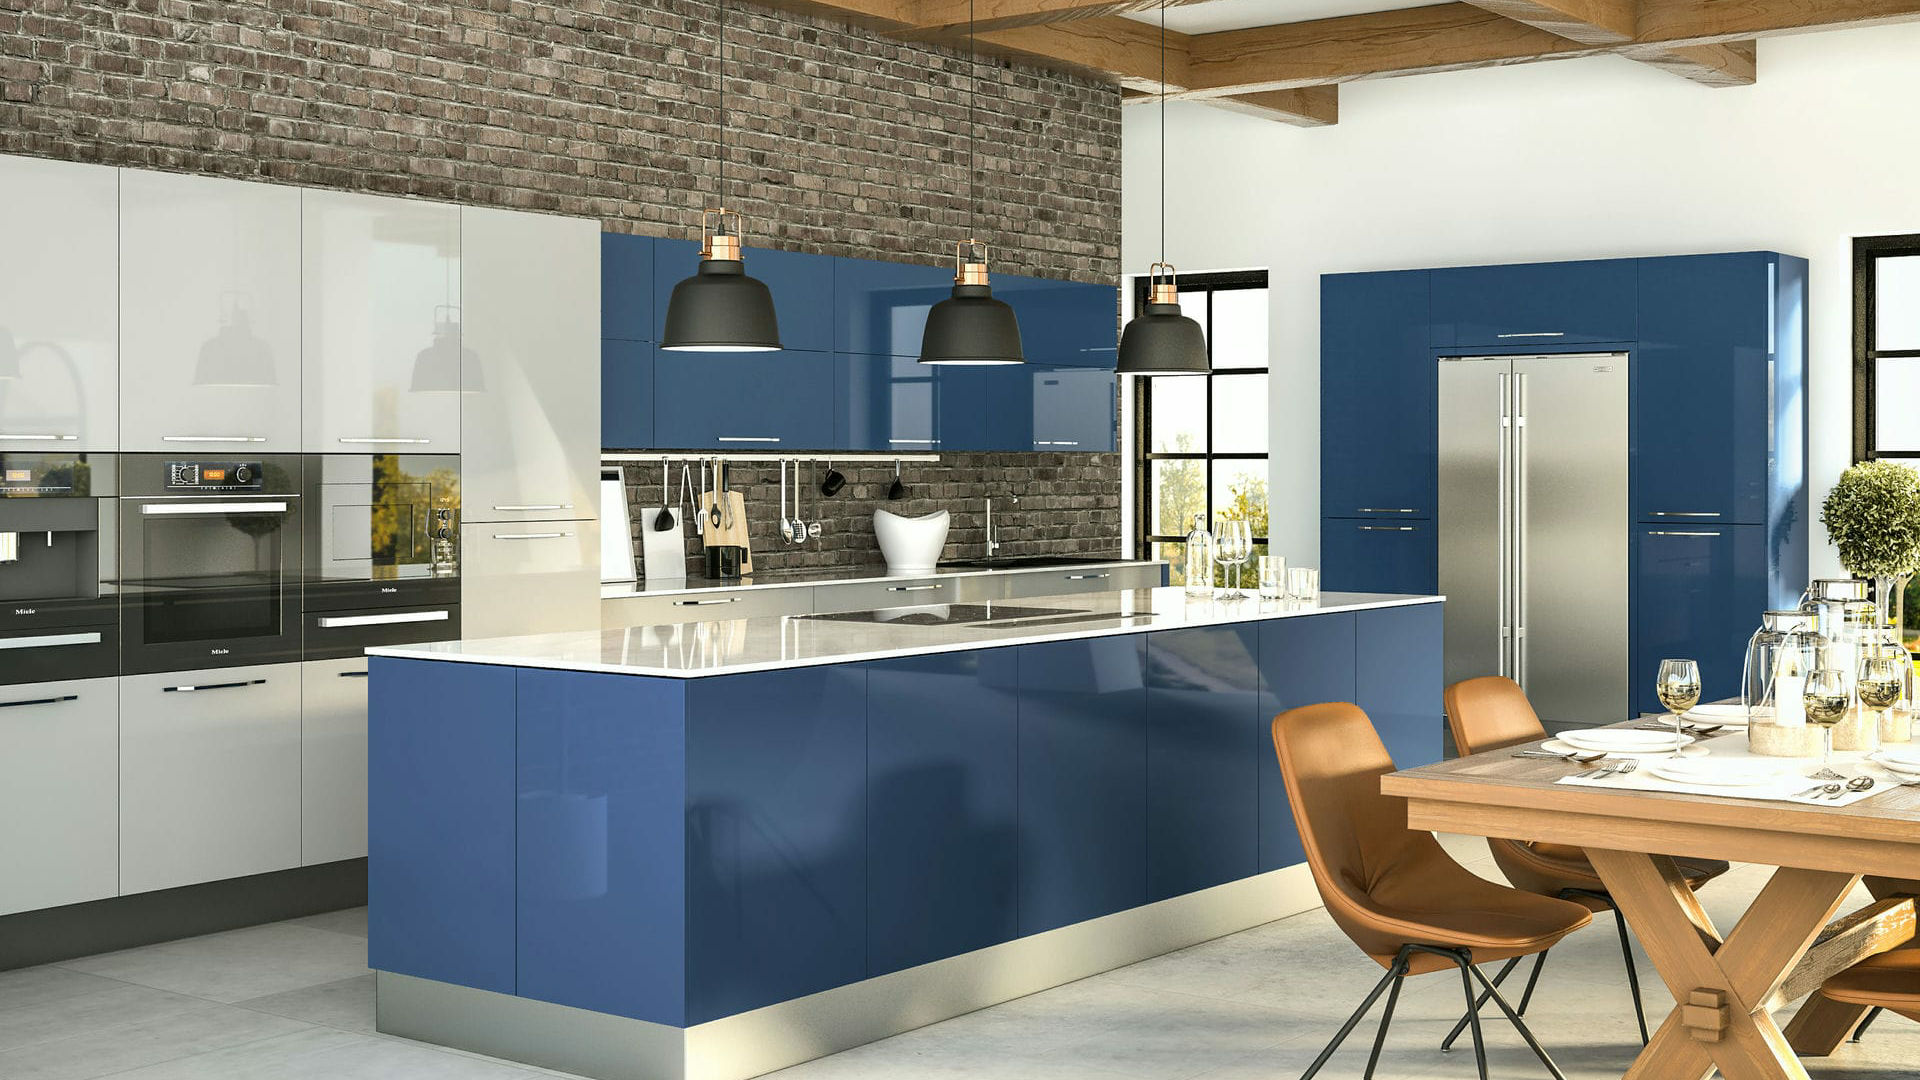 Gloss Acrylic Baltic Blue kitchens featuring a high-shine, vibrant blue finish for a striking modern look